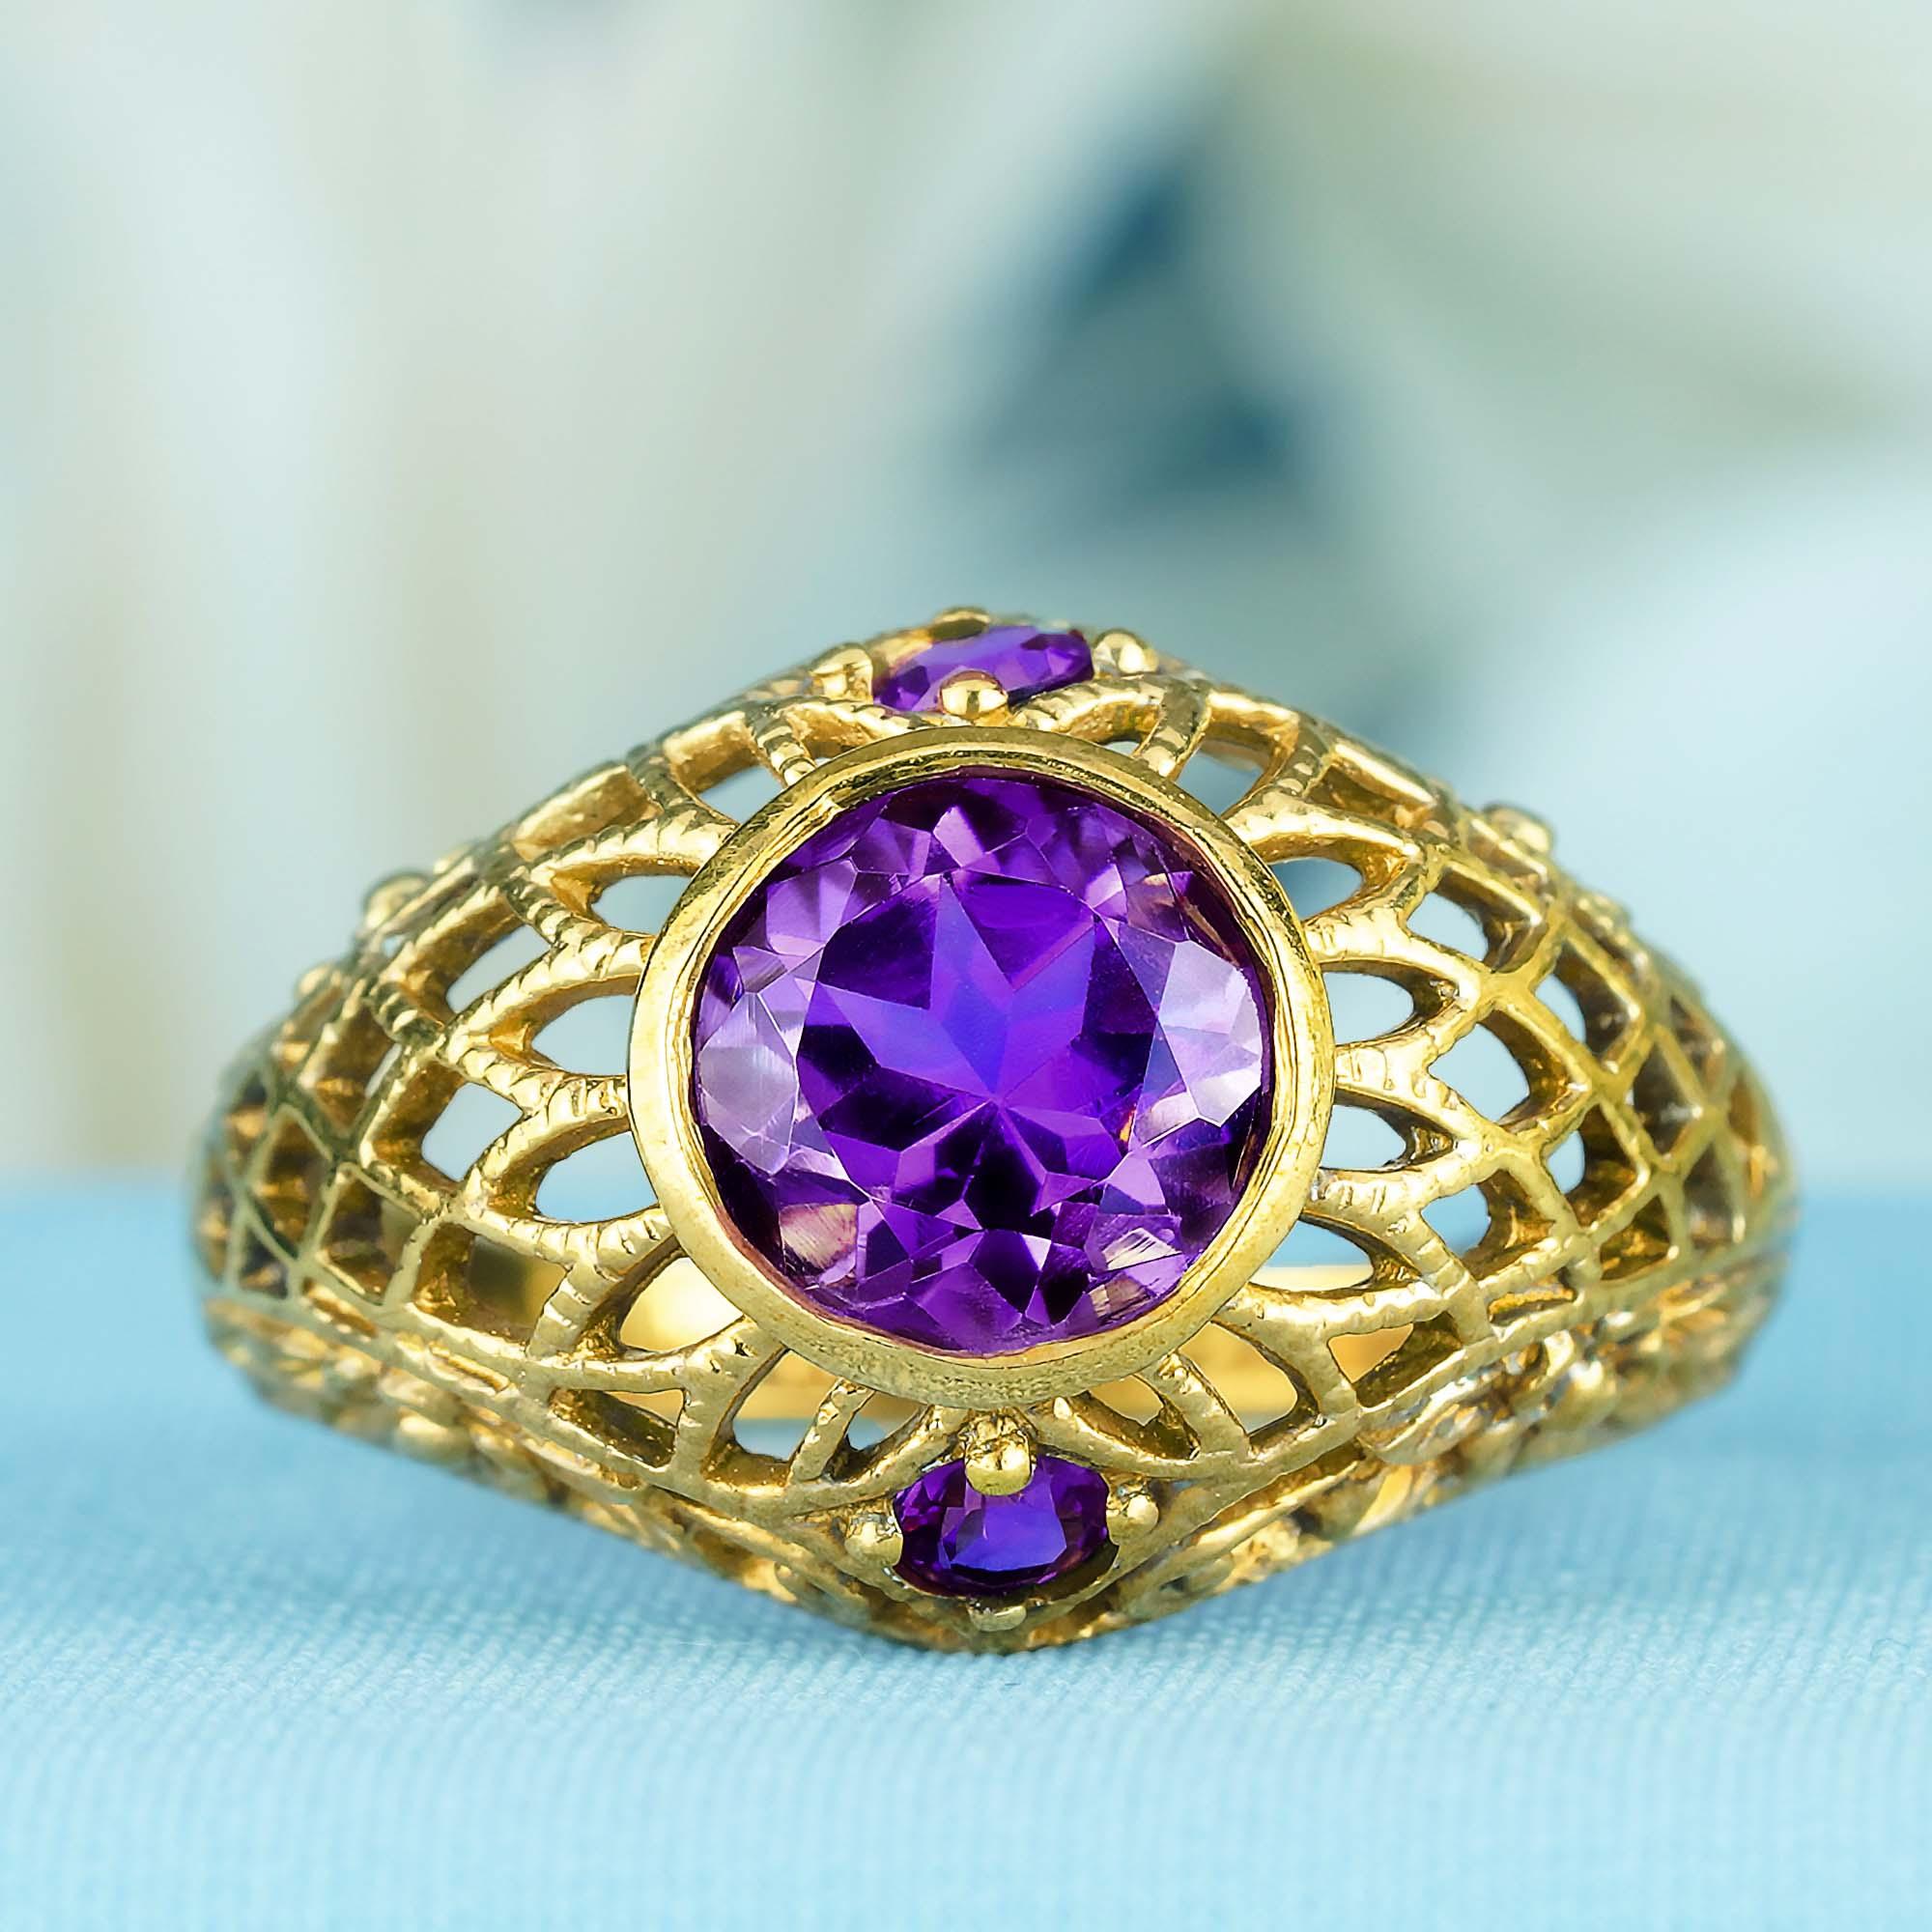 For Sale:  Natural Amethyst Vintage Style Filigree Net Ring in Solid 9K Yellow Gold 3